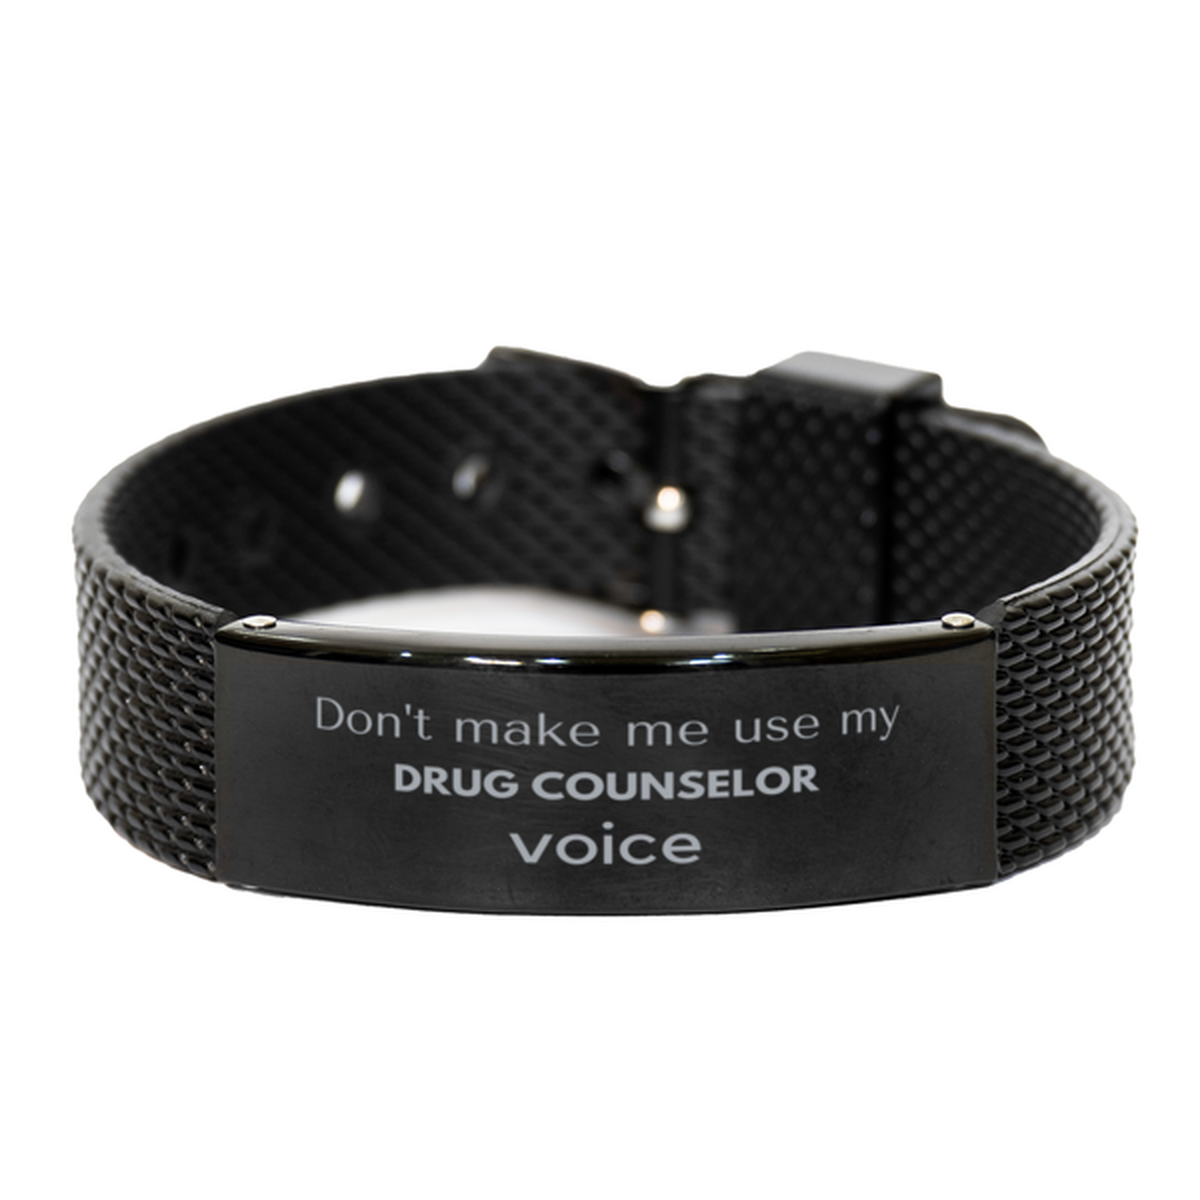 Don't make me use my Drug Counselor voice, Sarcasm Drug Counselor Gifts, Christmas Drug Counselor Black Shark Mesh Bracelet Birthday Unique Gifts For Drug Counselor Coworkers, Men, Women, Colleague, Friends